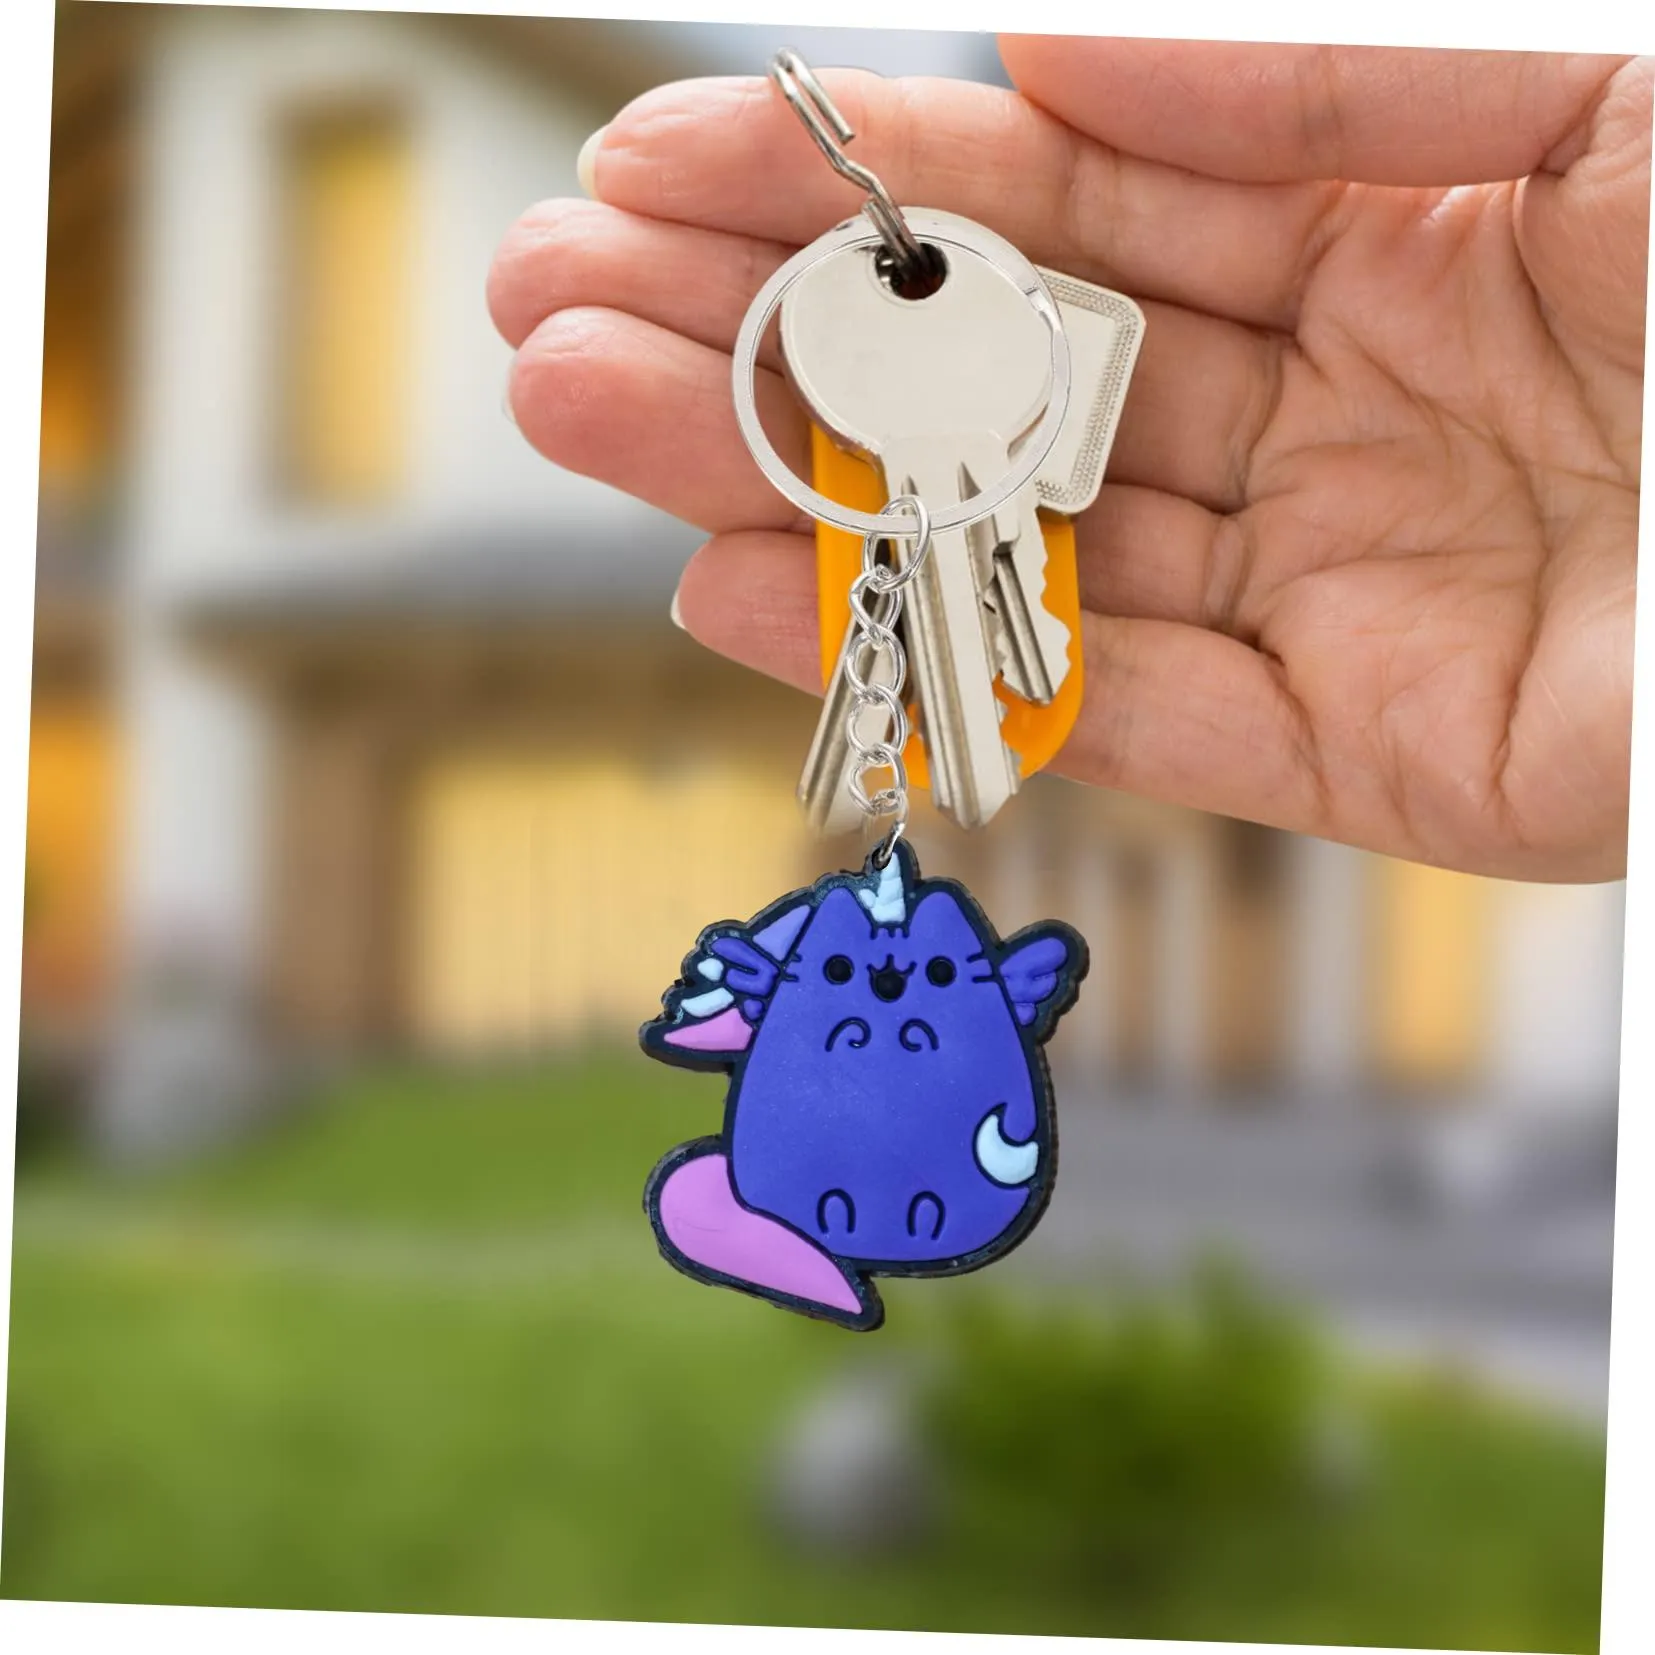 cats and keychain for kids party favors keychains men key chain girls keyring suitable schoolbag backpack shoulder bag pendant accessories charm